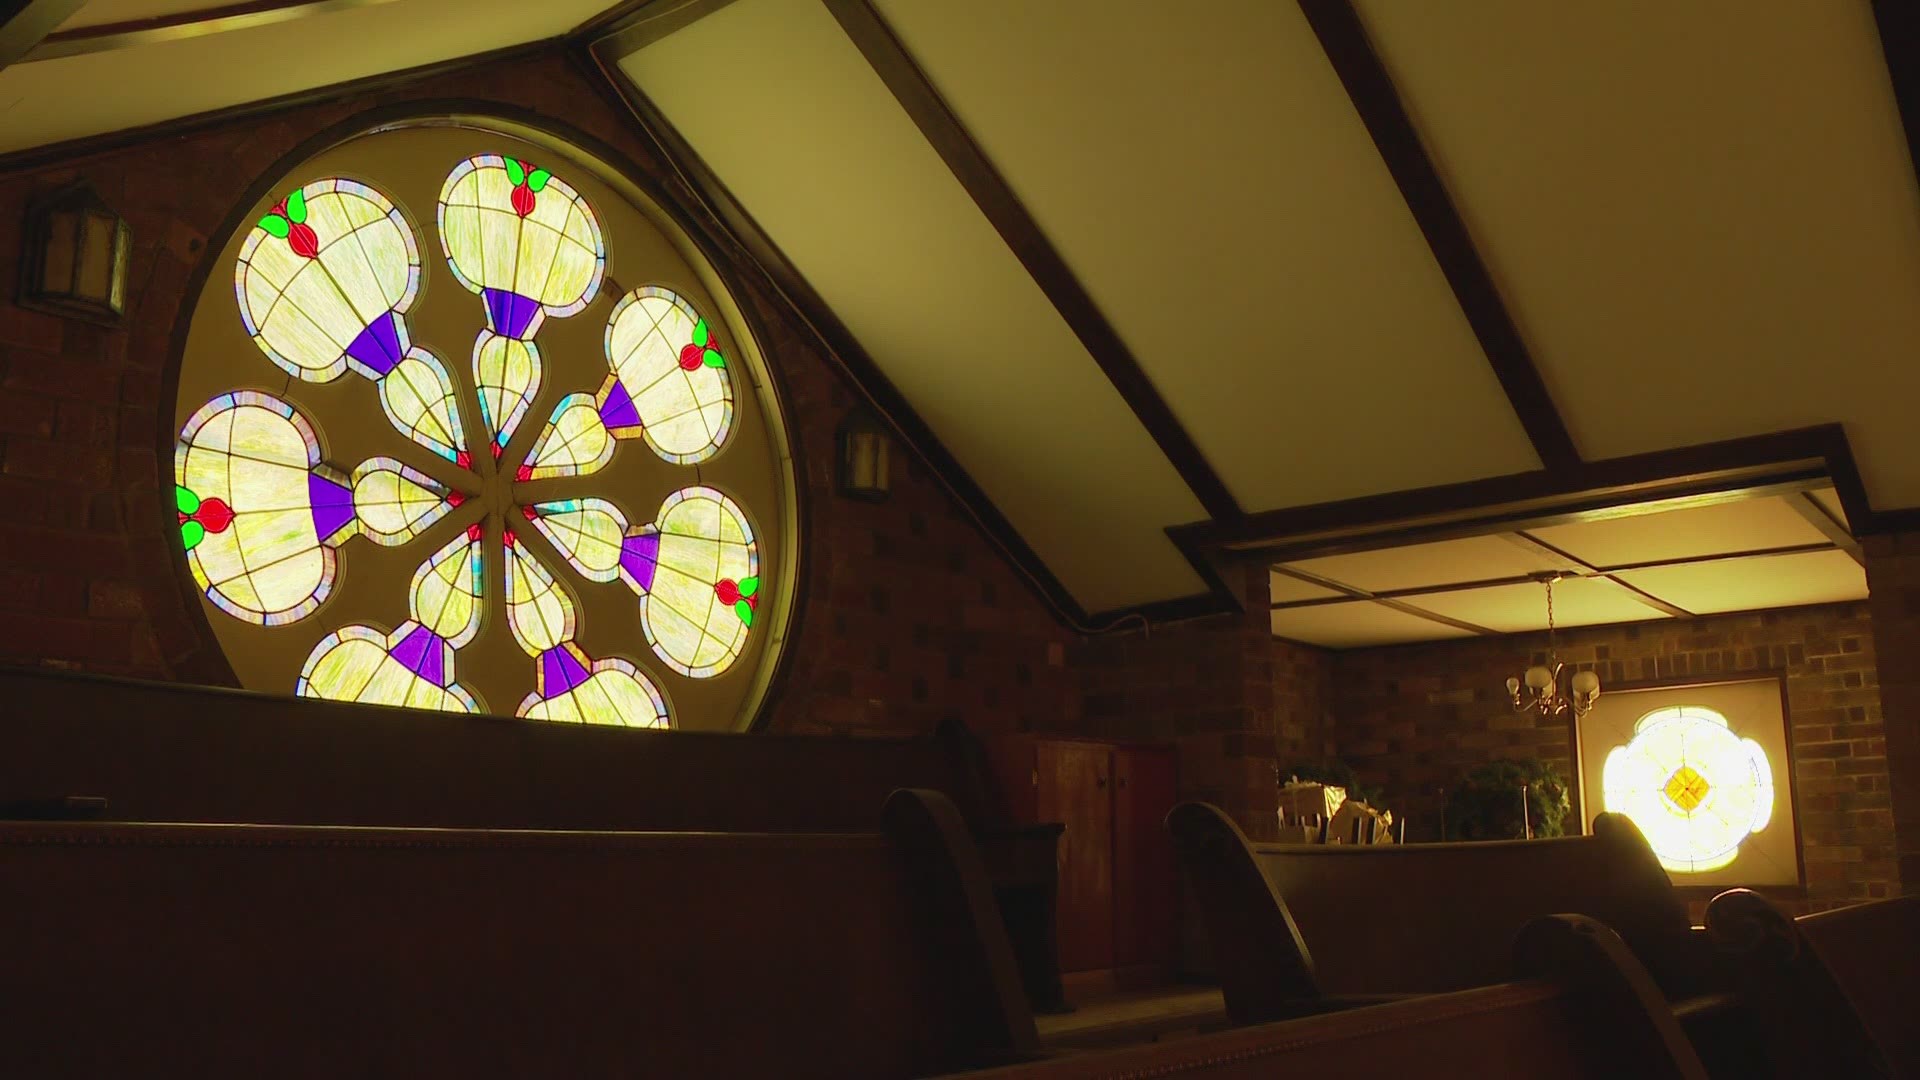 Built in 1931, two stained-glass windows in Ganges United Methodist Church are in danger of falling due to age. The church is fighting to find $89,000 for repairs.